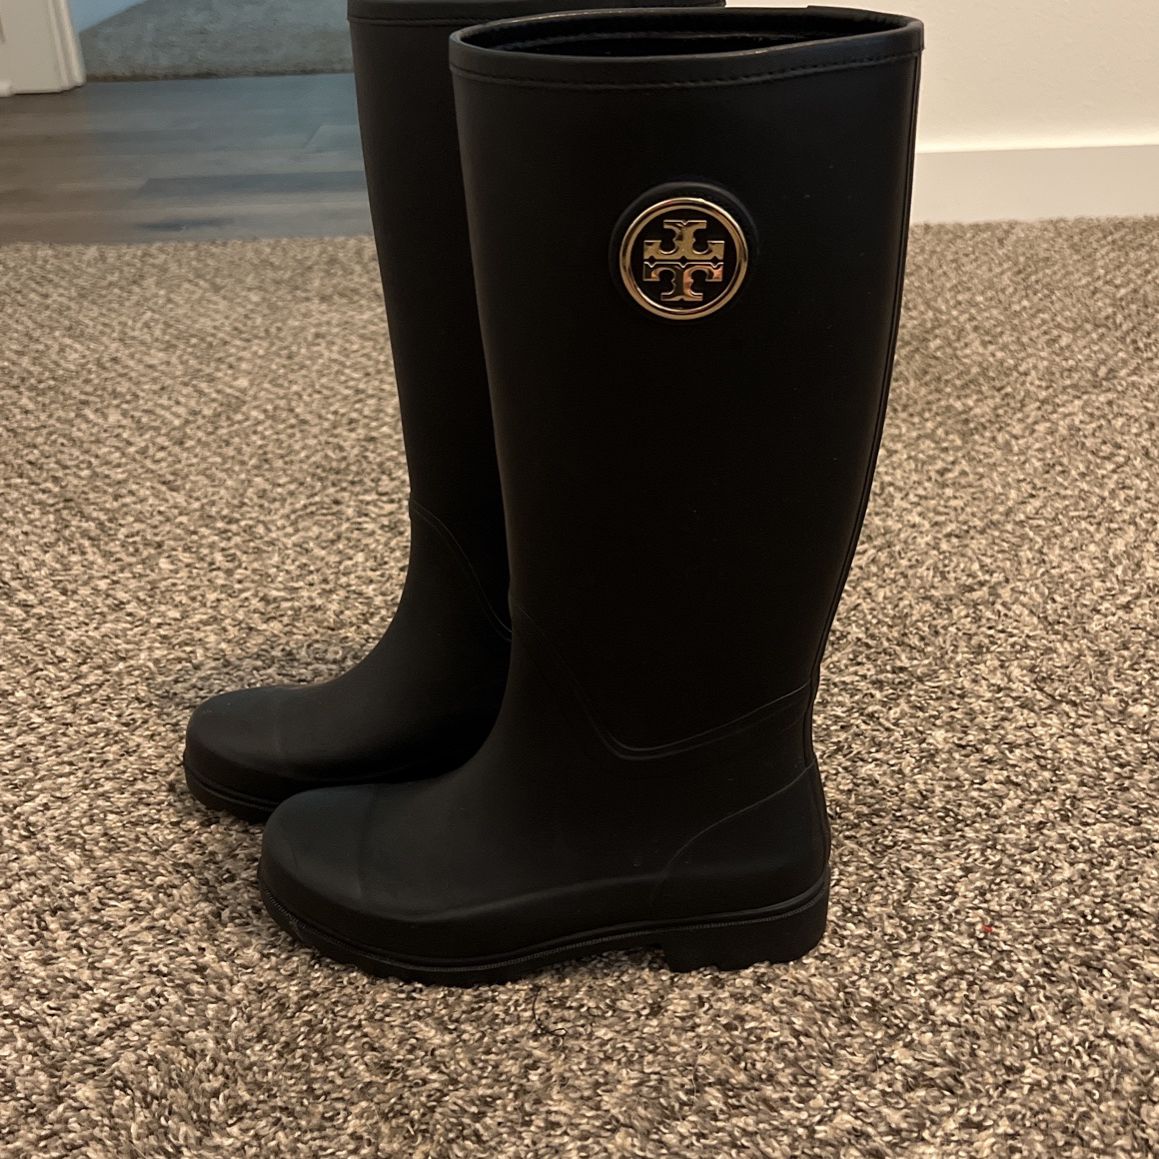 Tory Burch Rain boots for Sale in Greenville, TX - OfferUp